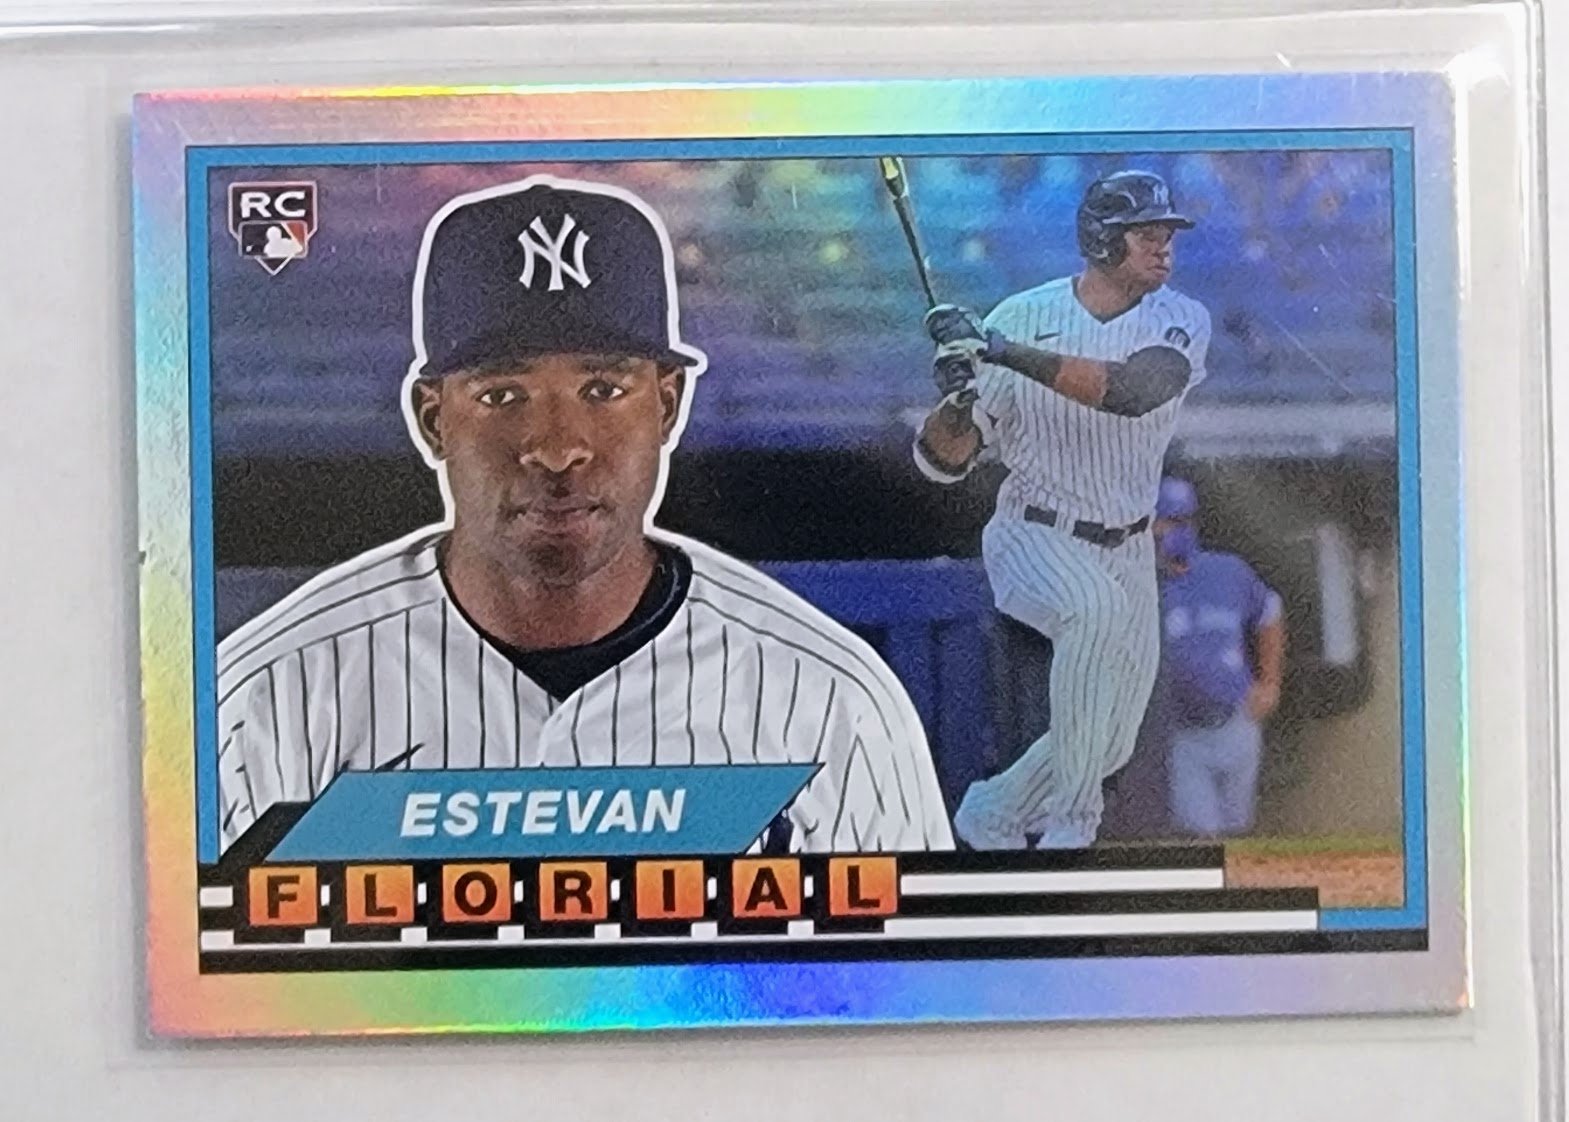 2021 Topps Archives Estevan Florial Rainbow Rookie Foil Baseball Card AVM1 simple Xclusive Collectibles   